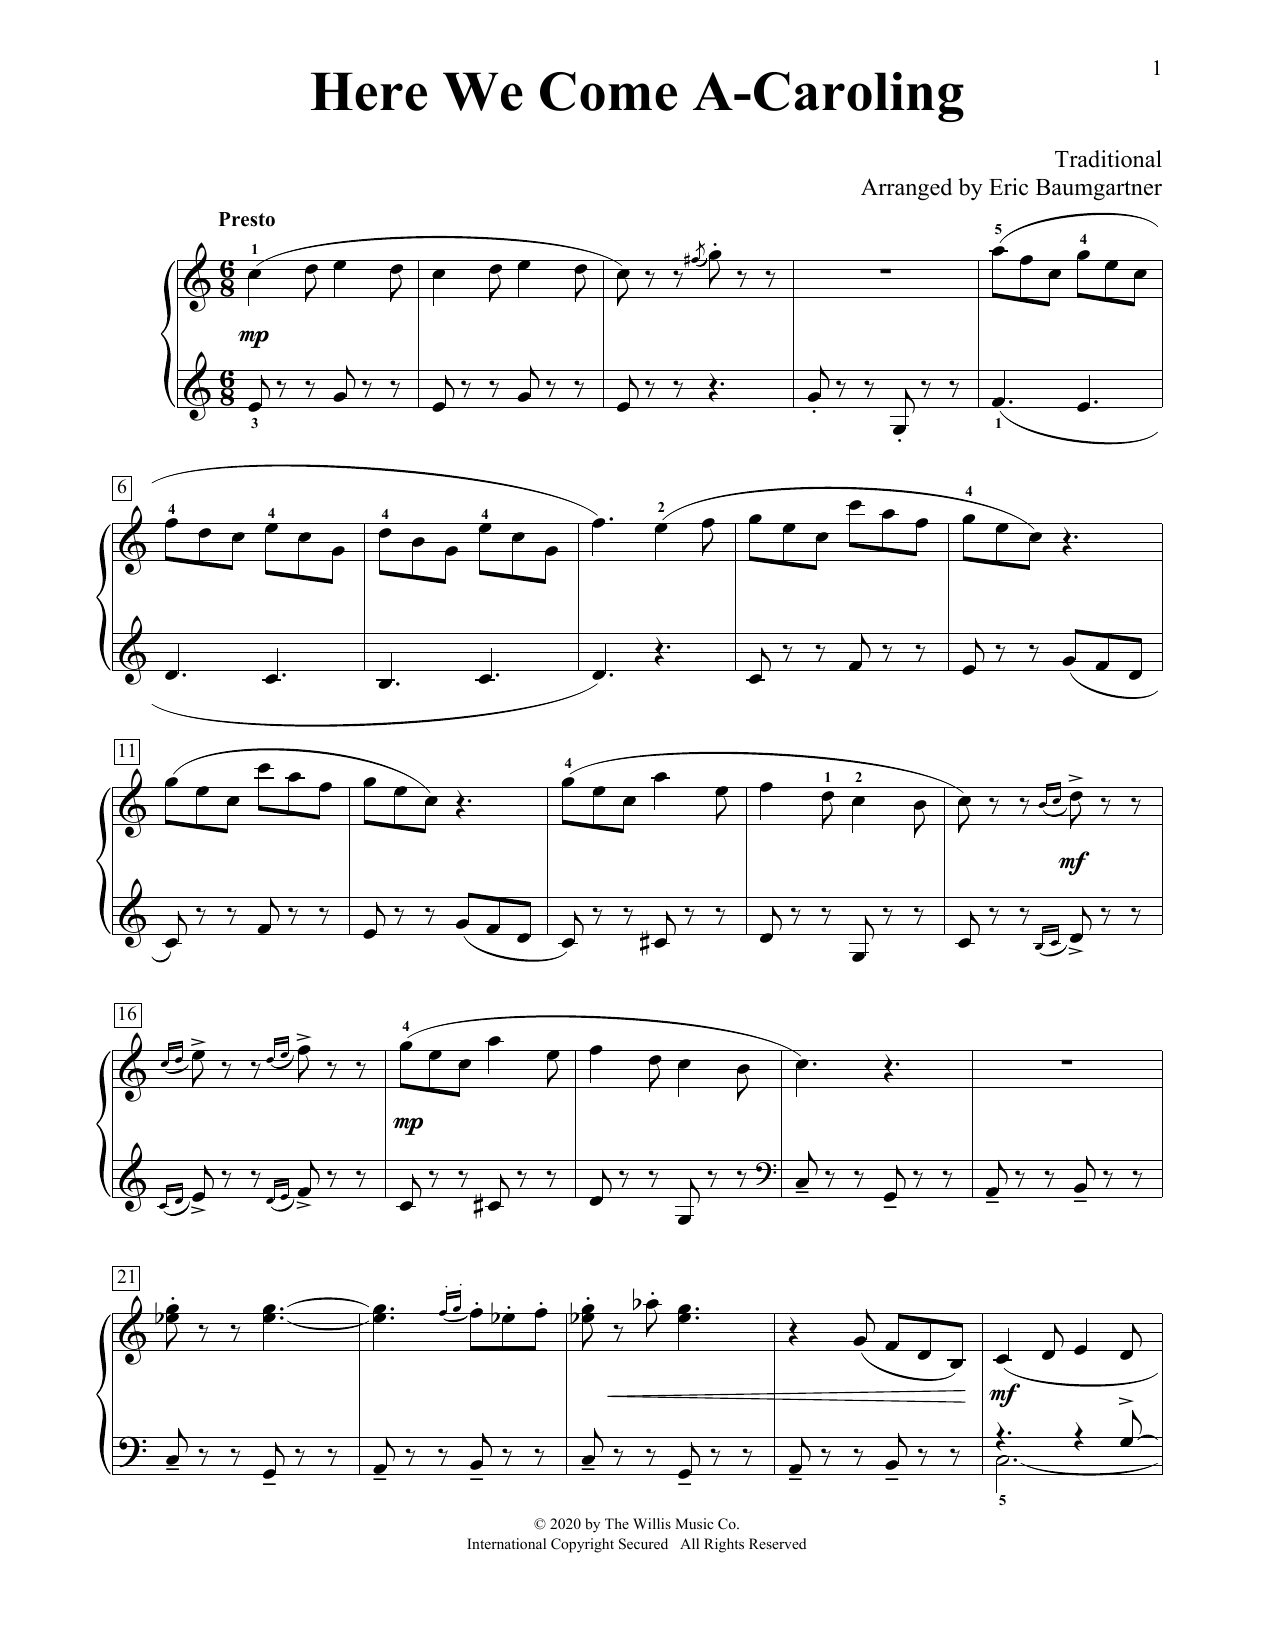 Download Traditional Here We Come A-Caroling [Jazz version] Sheet Music